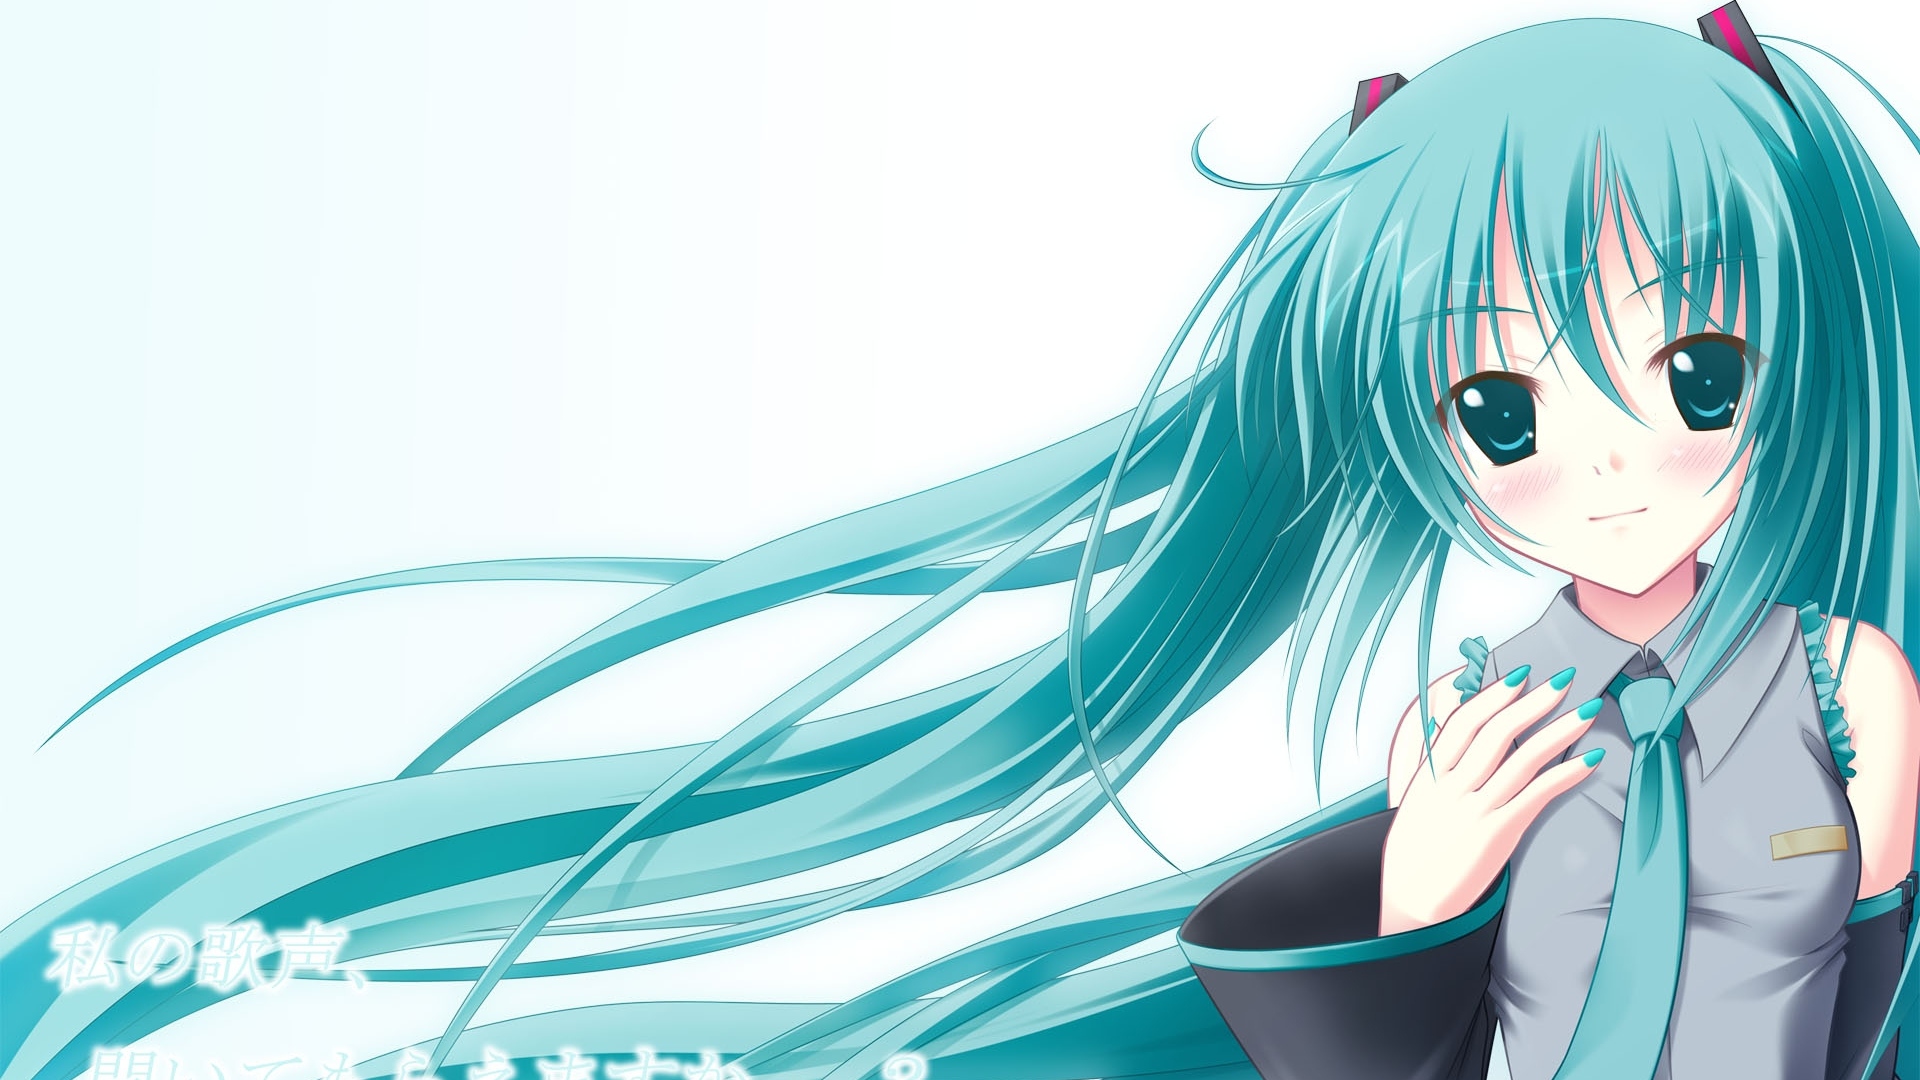 Hd Anime Wallpapers Full Hd Free Download - Imagenes 2048 X 1152 Anime -  1920x1080 Wallpaper 